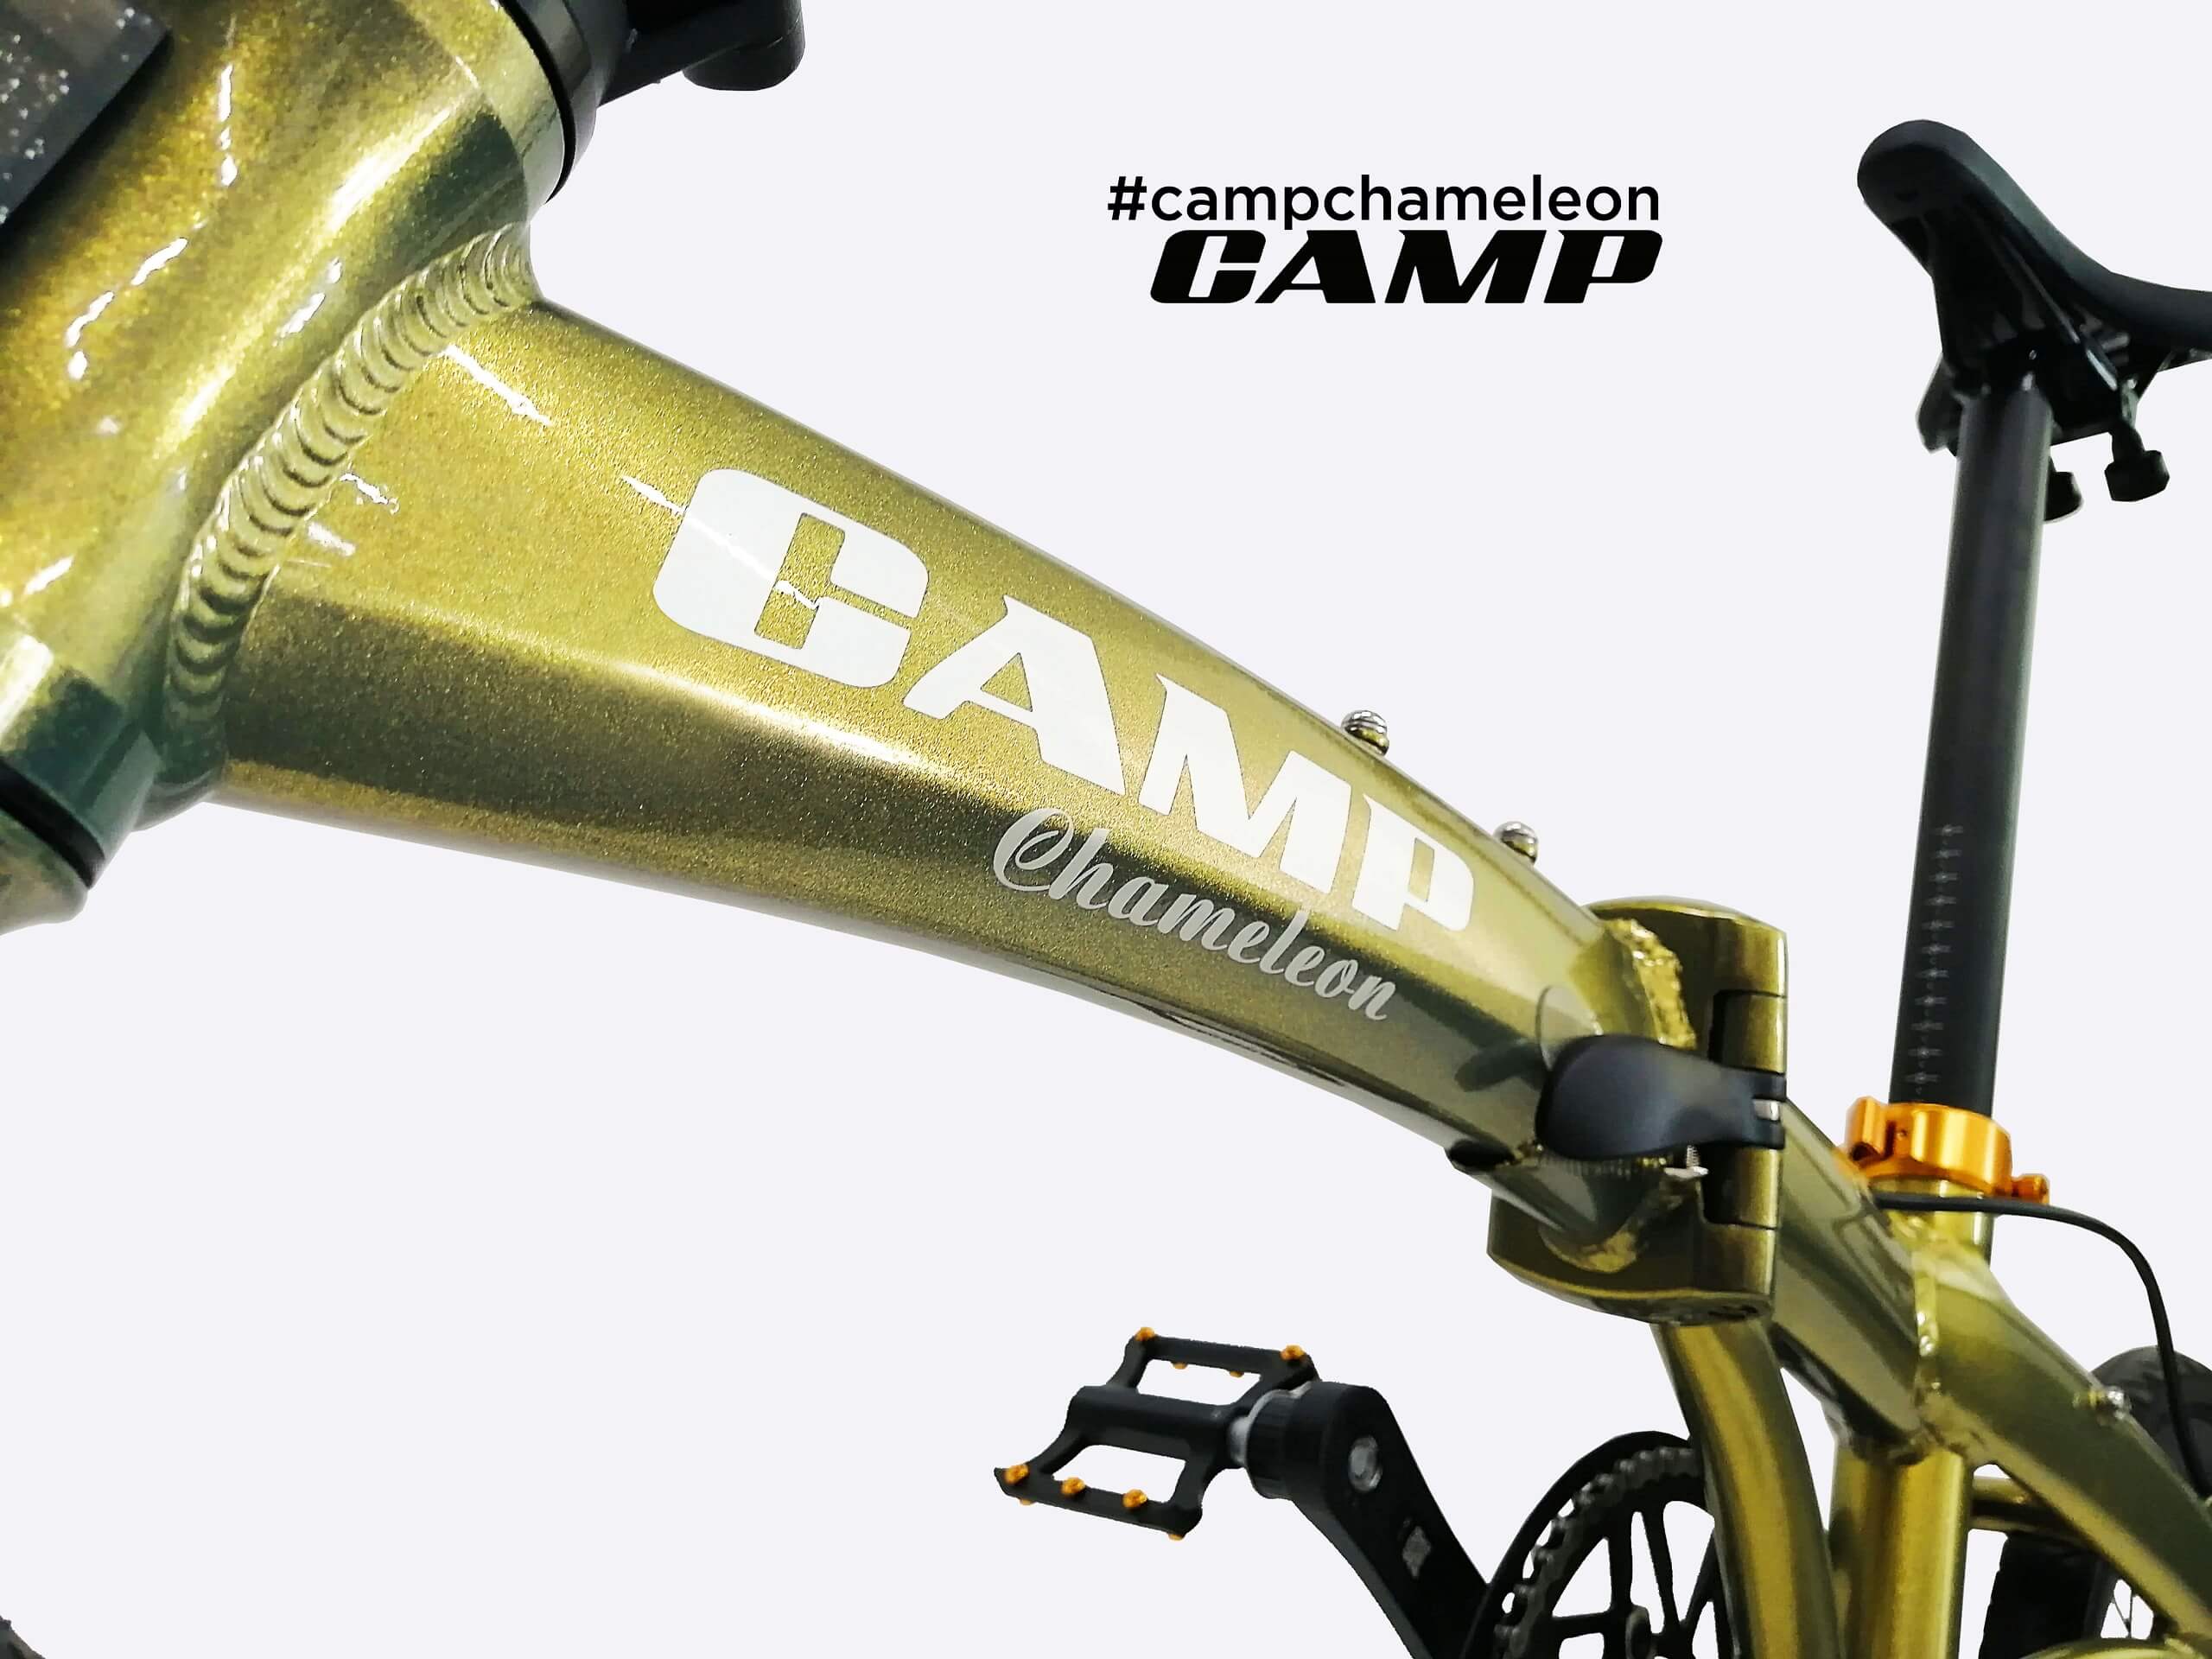 CAMP CHAMELEON foldable bicycle 1 - What are the mistakes someone new to cycling makes? | I want a fast bike